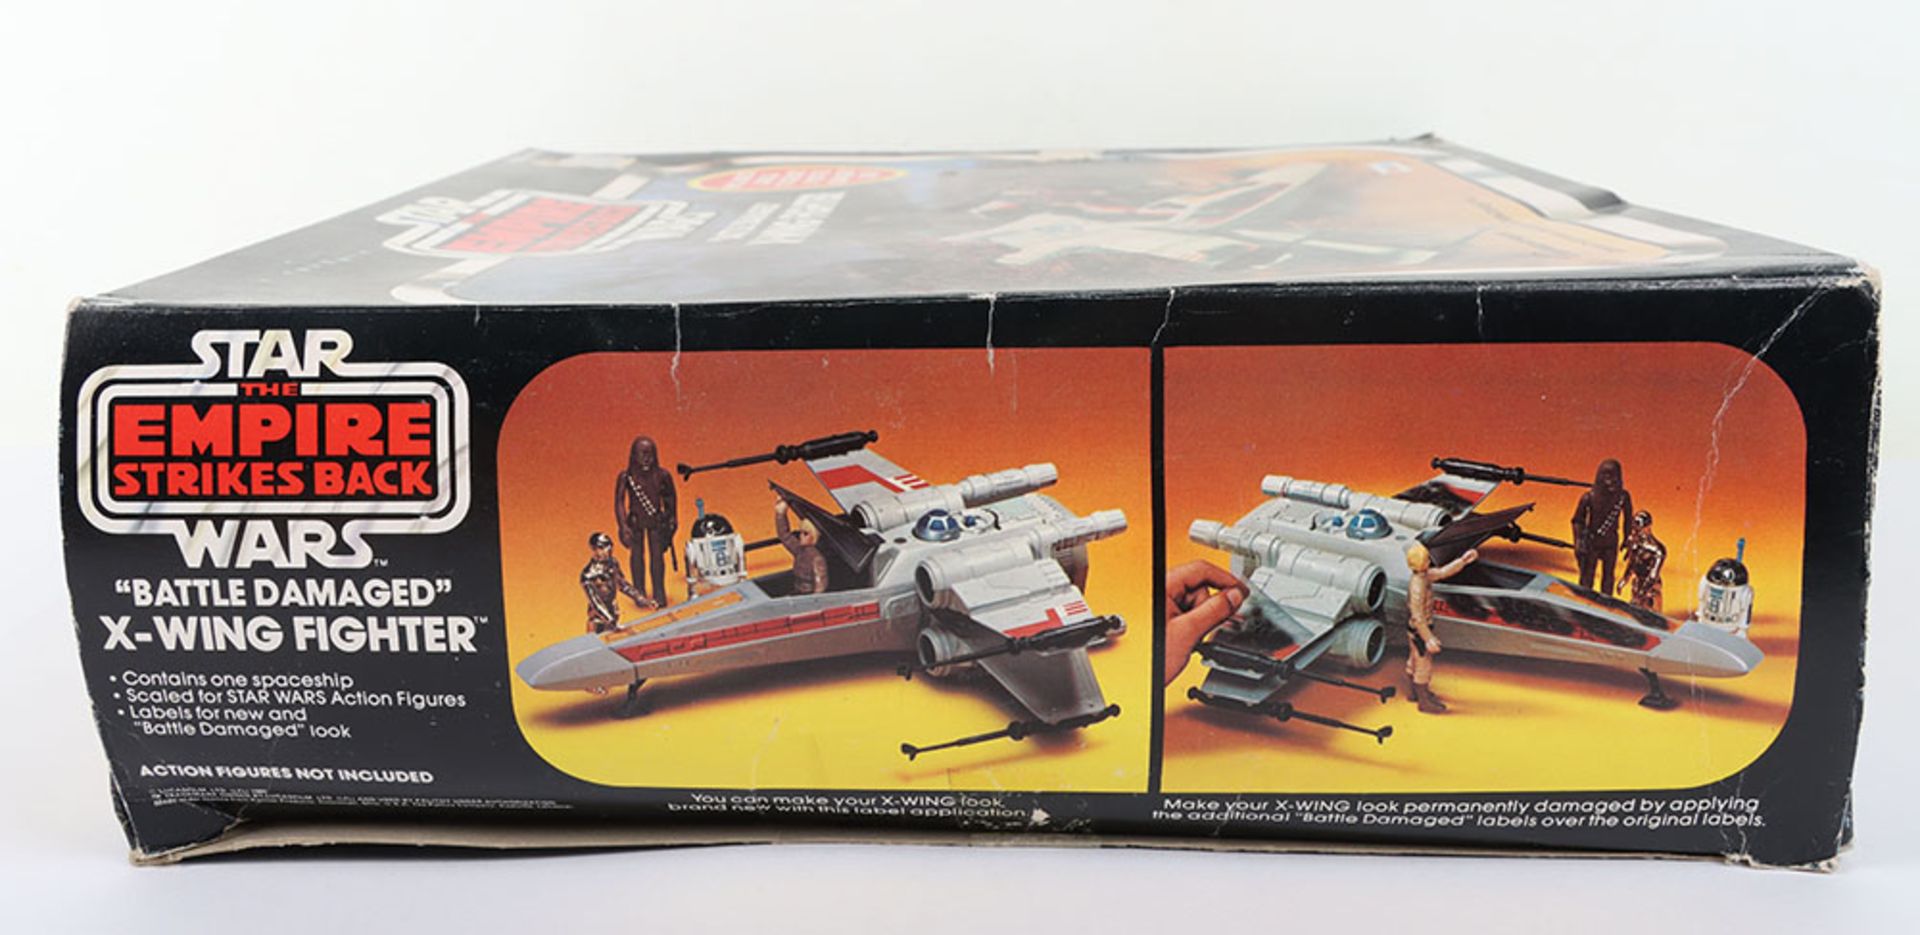 Boxed Vintage Palitoy Star Wars The Empire Strikes Back Battle Damaged X-Wing Fighter - Image 6 of 8